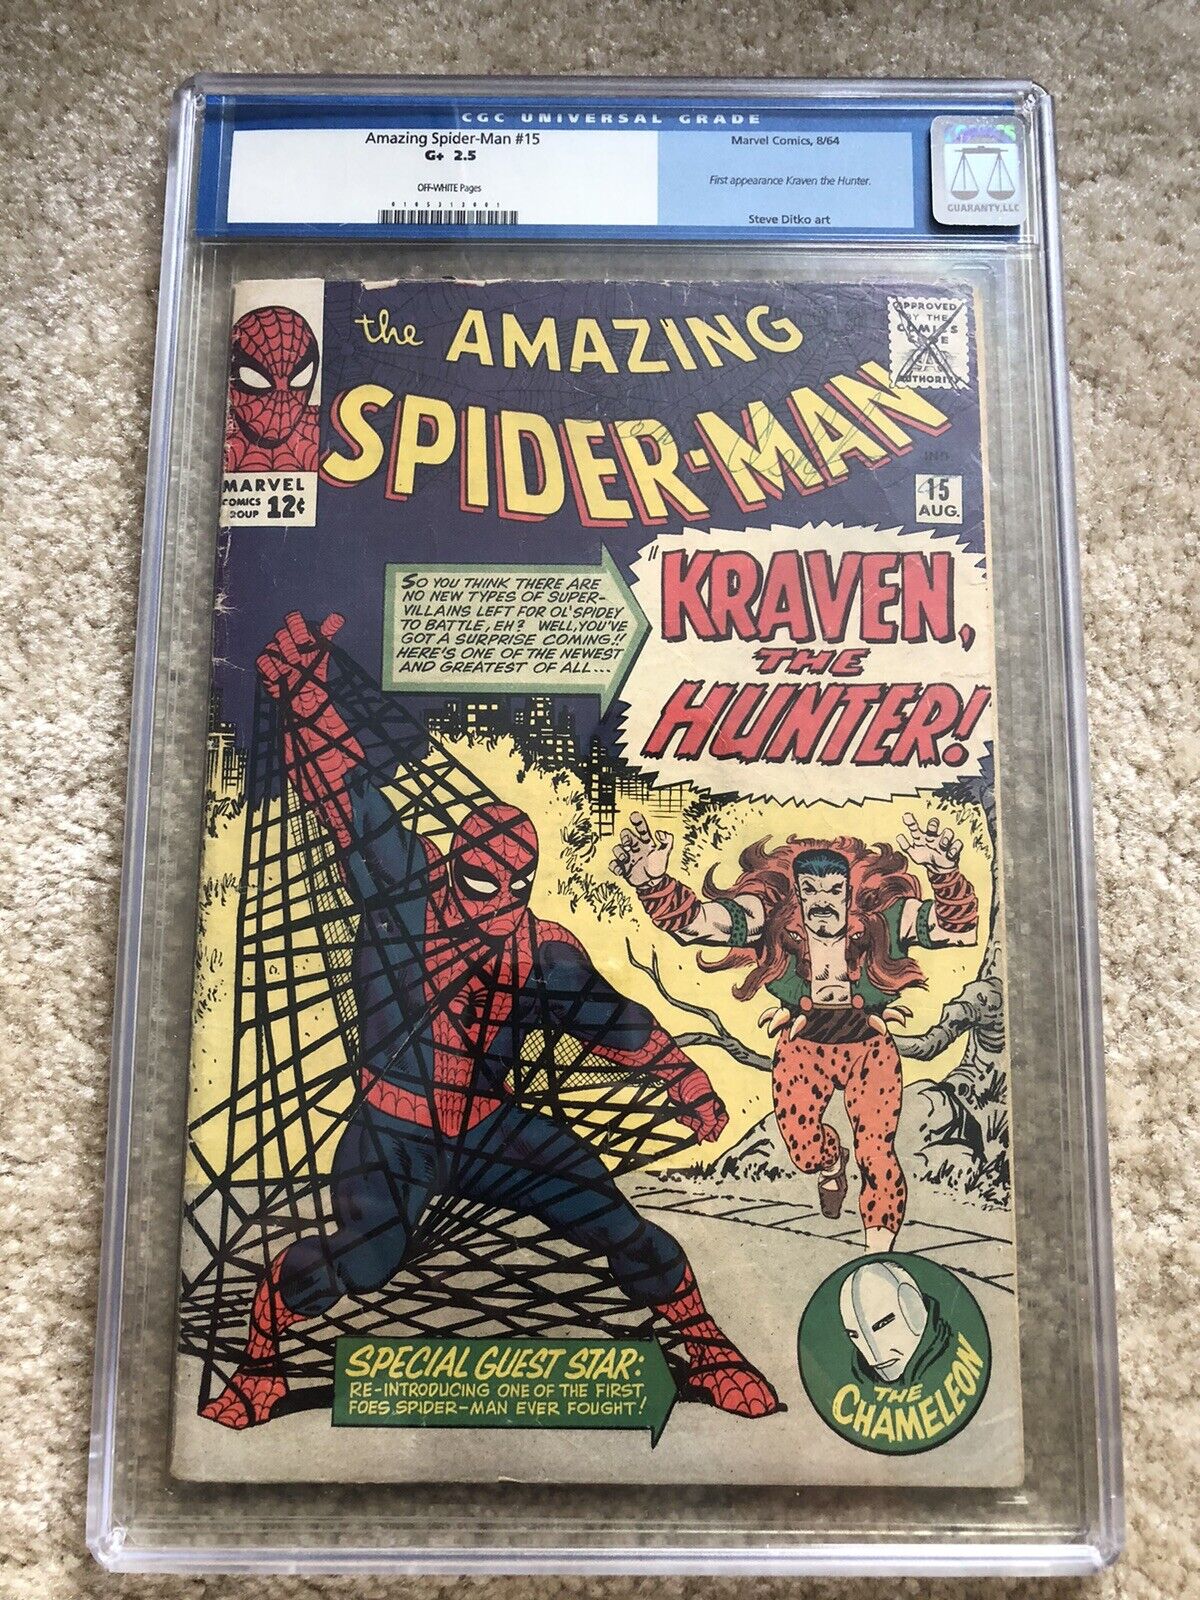 Amazing Spider-Man #15 - Marvel Comics 1964 CGC 2.5 1st appearance of Kraven the